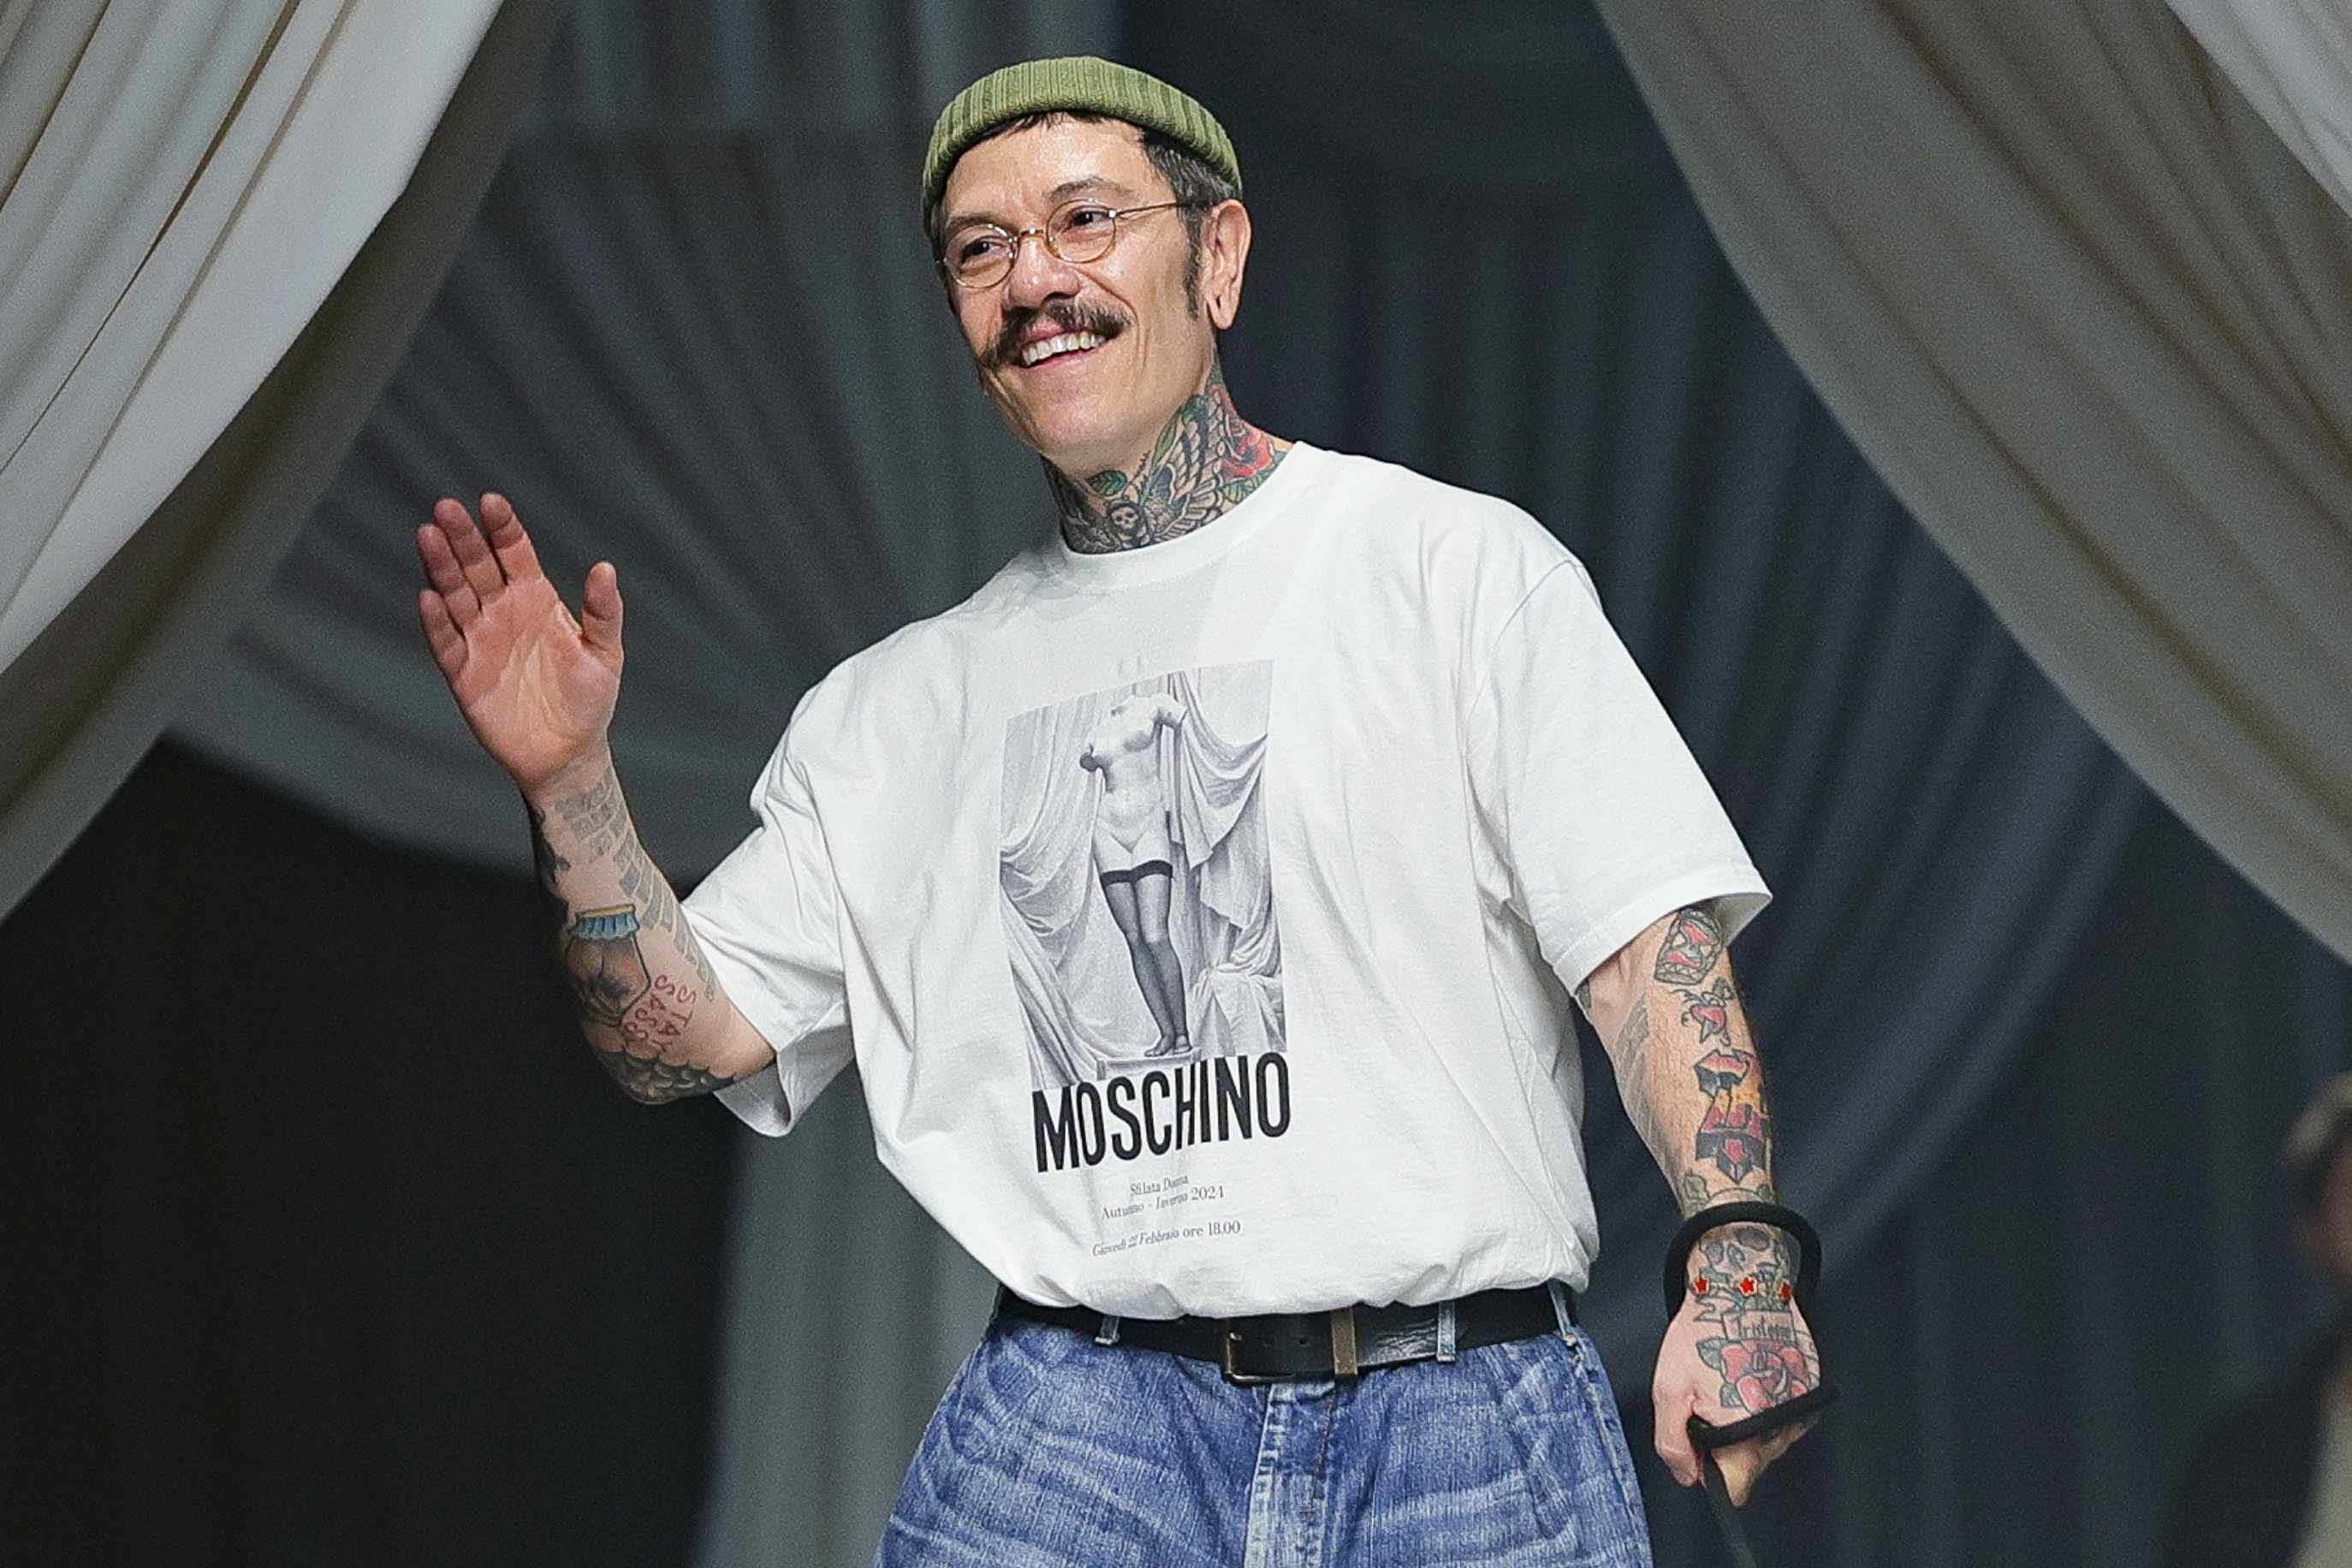 Moschino creative director Adrian Appiolaza wears a white t-shirt and blue jeans with his pug